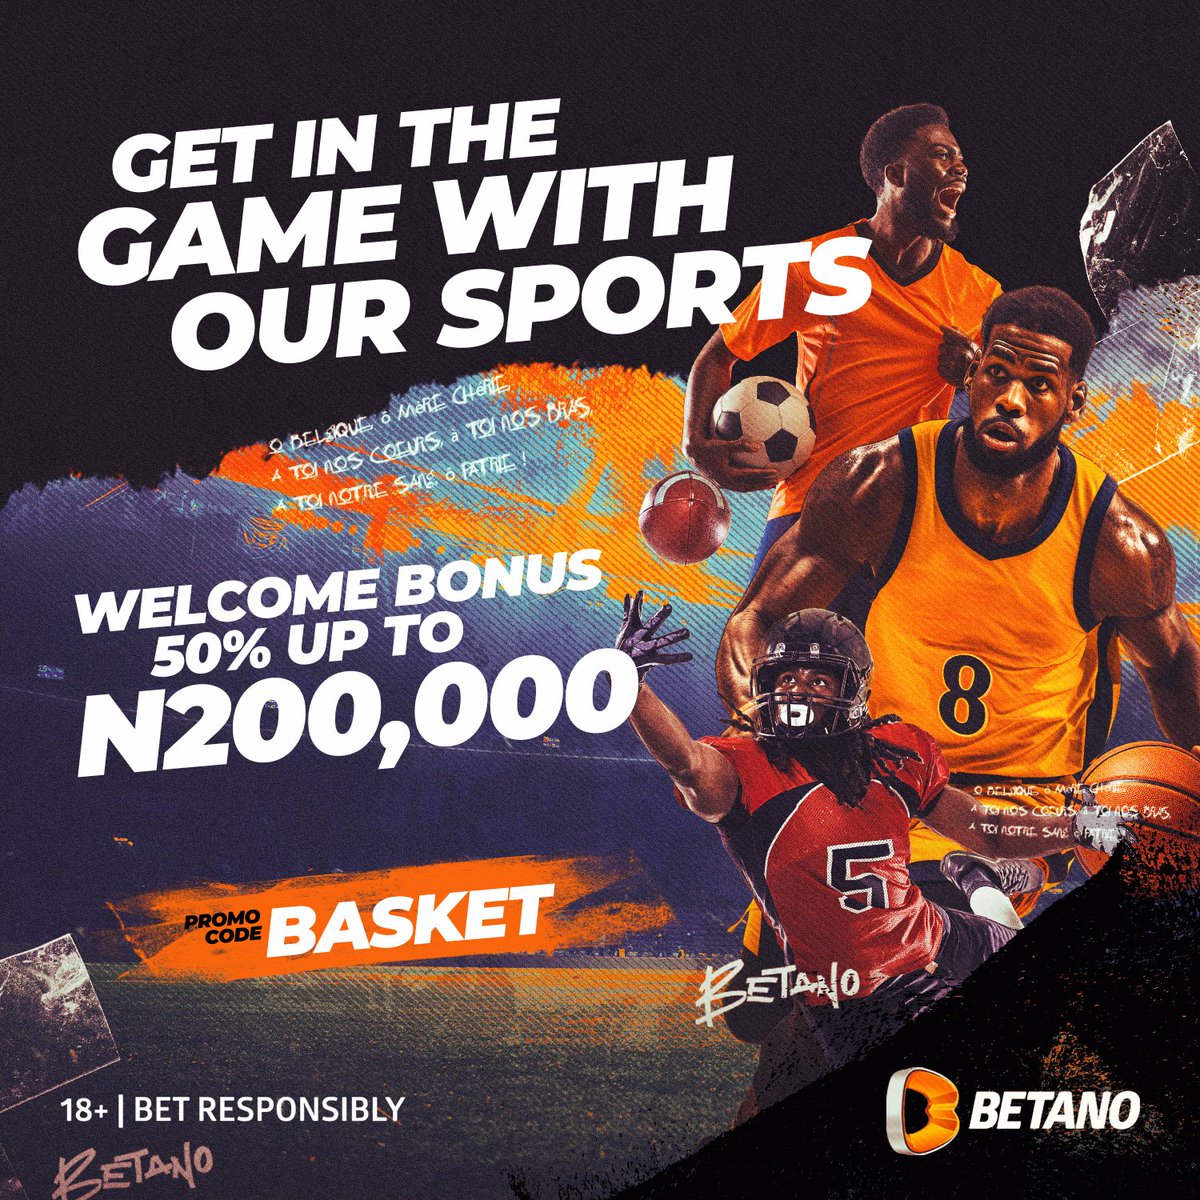 I don go again Register with BETANO and get upto 50% bonus on your first deposit Promo code BASKET Link: bit.ly/3TPMSQf Game Code: QAI62DVM Game Link: betano.ng/mybets/2021456… Bet responsibly 🔞